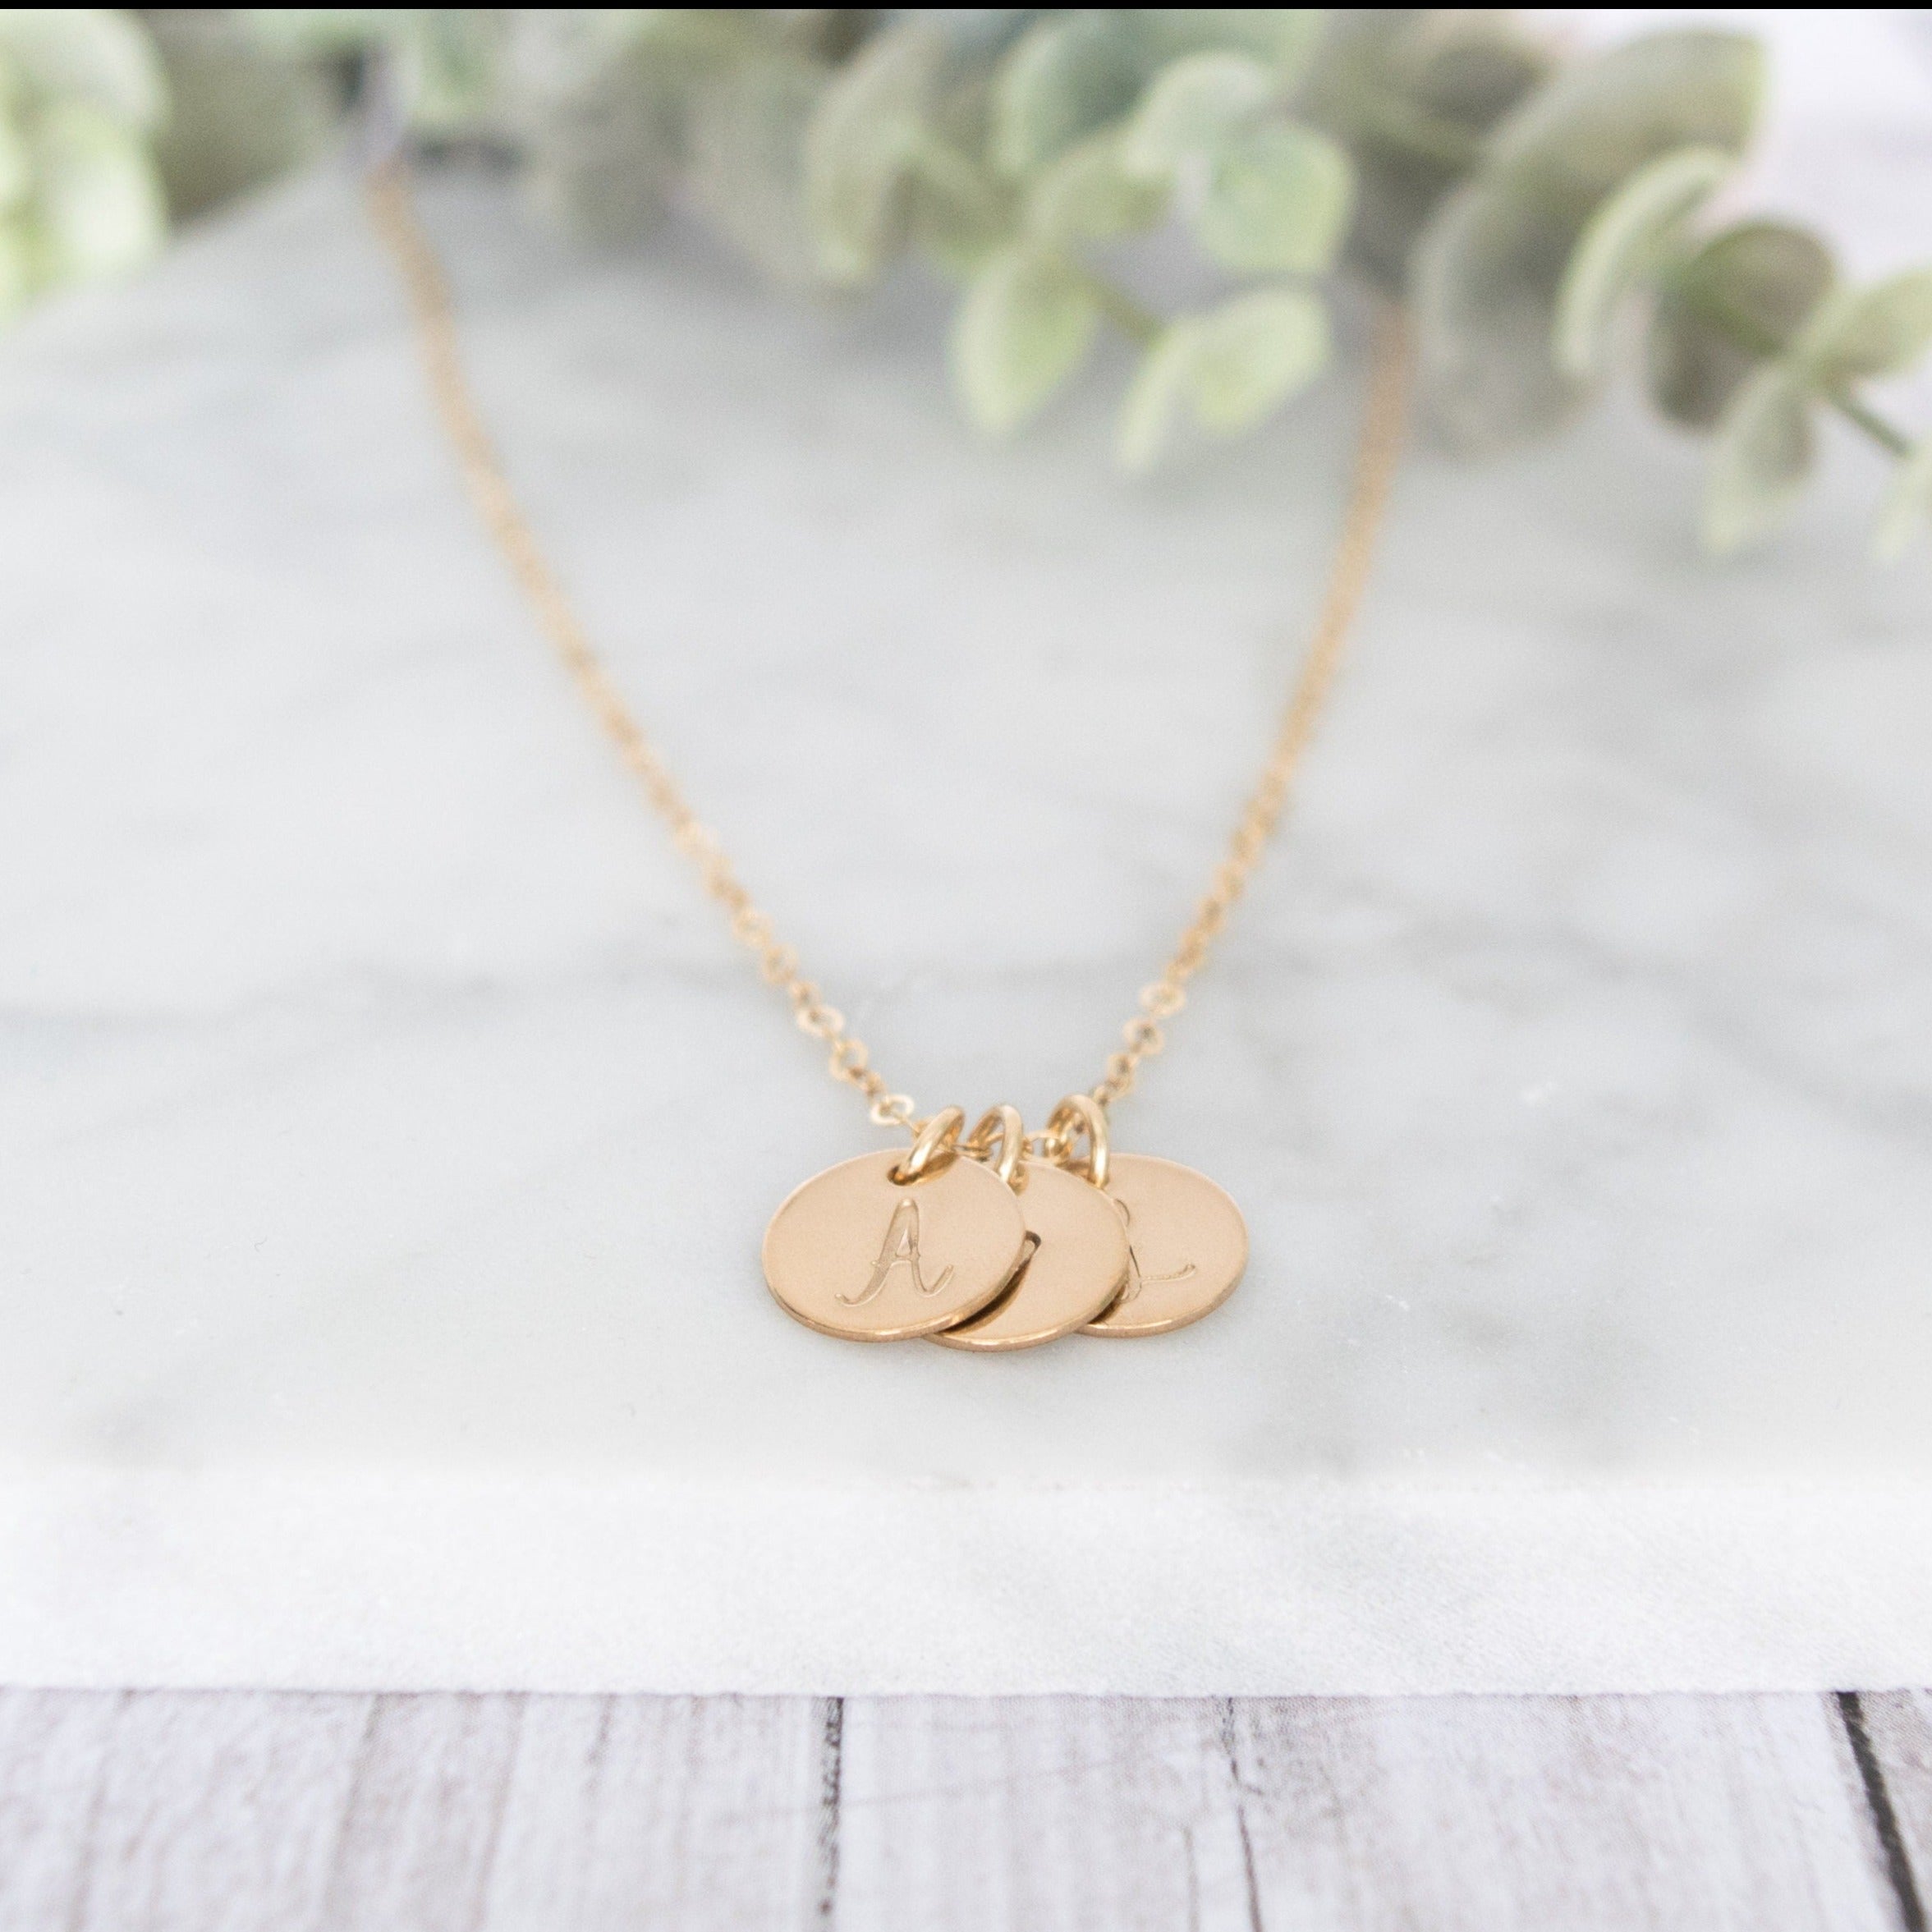 Buy Initial Necklace Gold Filled or Sterling Silver, Personalized Hand  Stamped Letter Necklace, Hammered Gold Coin Necklace for Bridesmaids Online  in India - Etsy